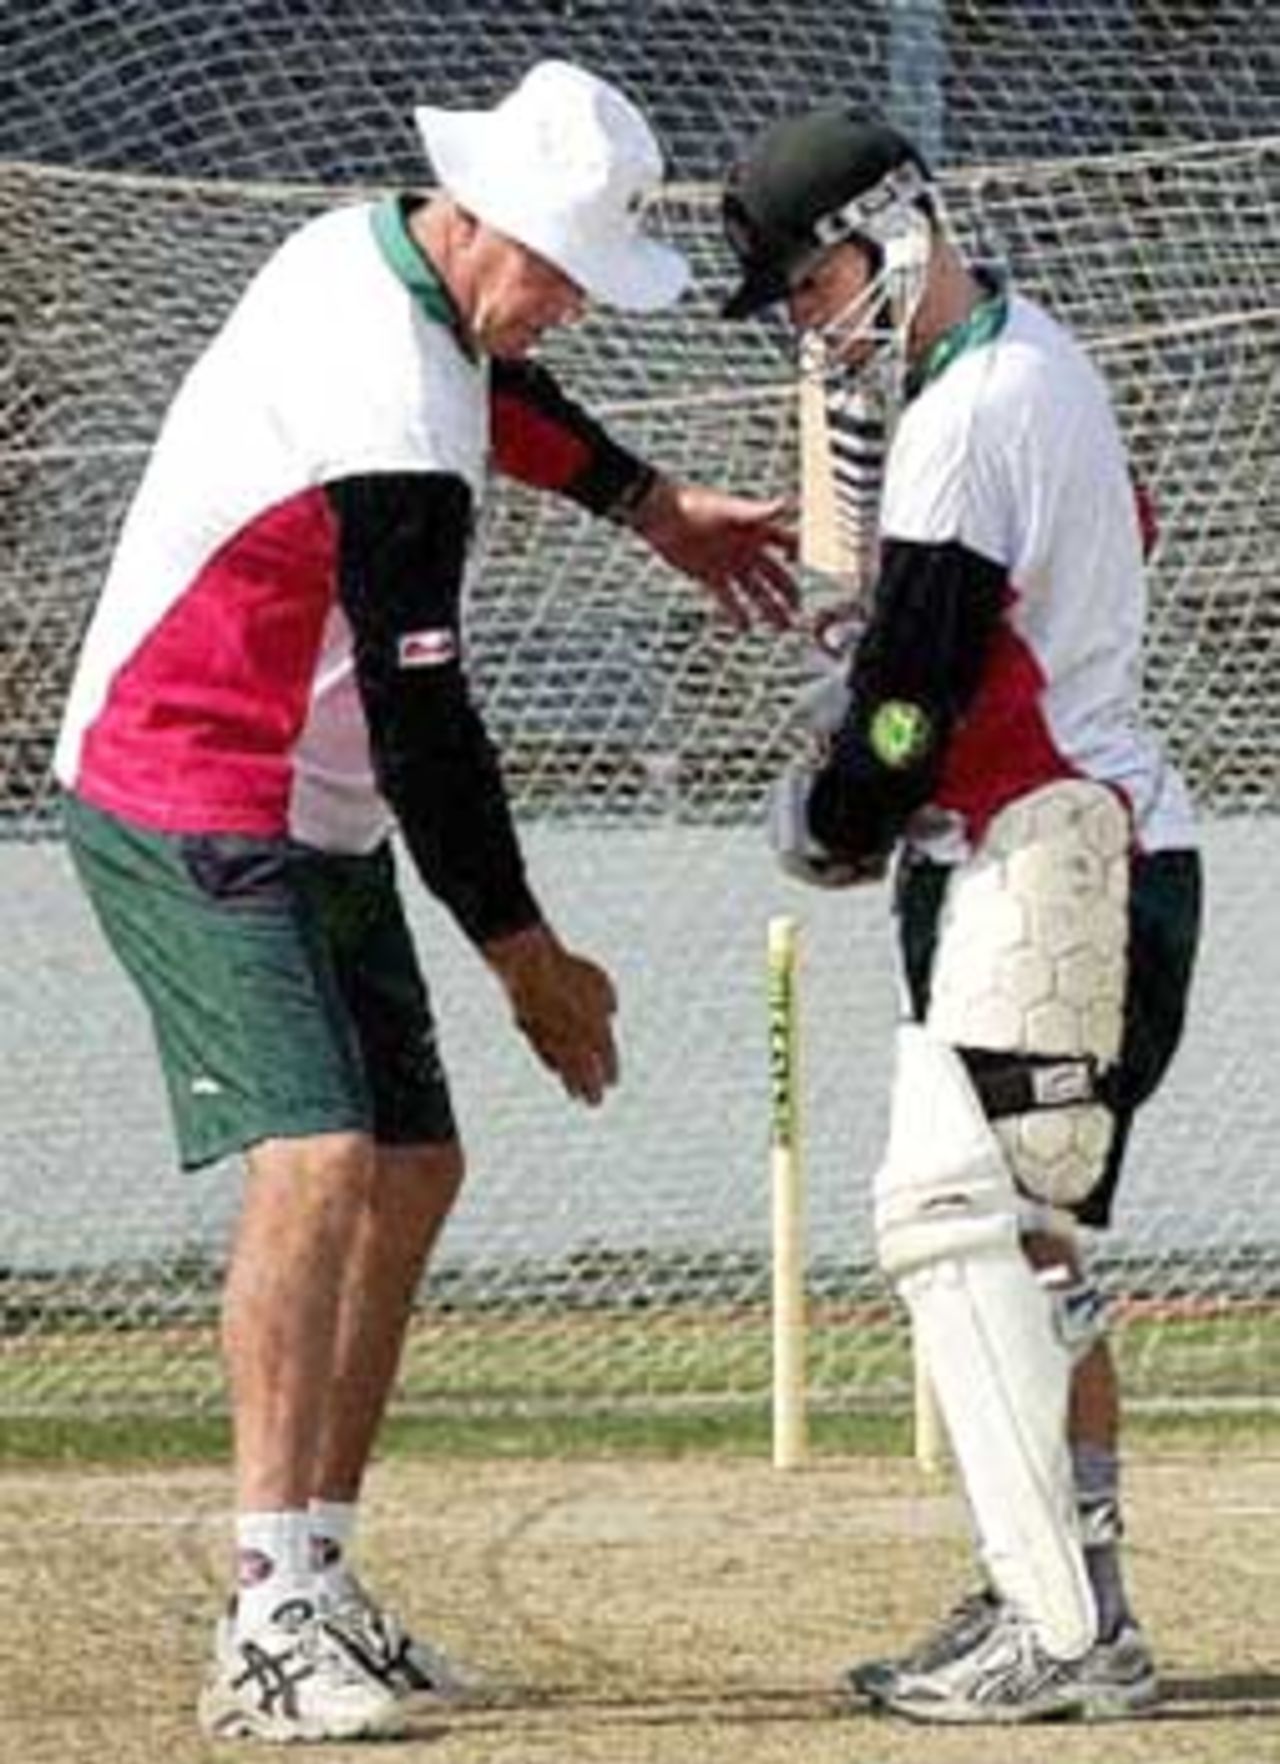 Zimbabwe's coach, Carl Rackemann (L), discusses batting technique with Zimbabwe batsman Stuart Carlisle at net practice in Kanpur 10 December 2000 on the eve of the fourth one-day cricket match against India. India leads the five-match series 2-1.